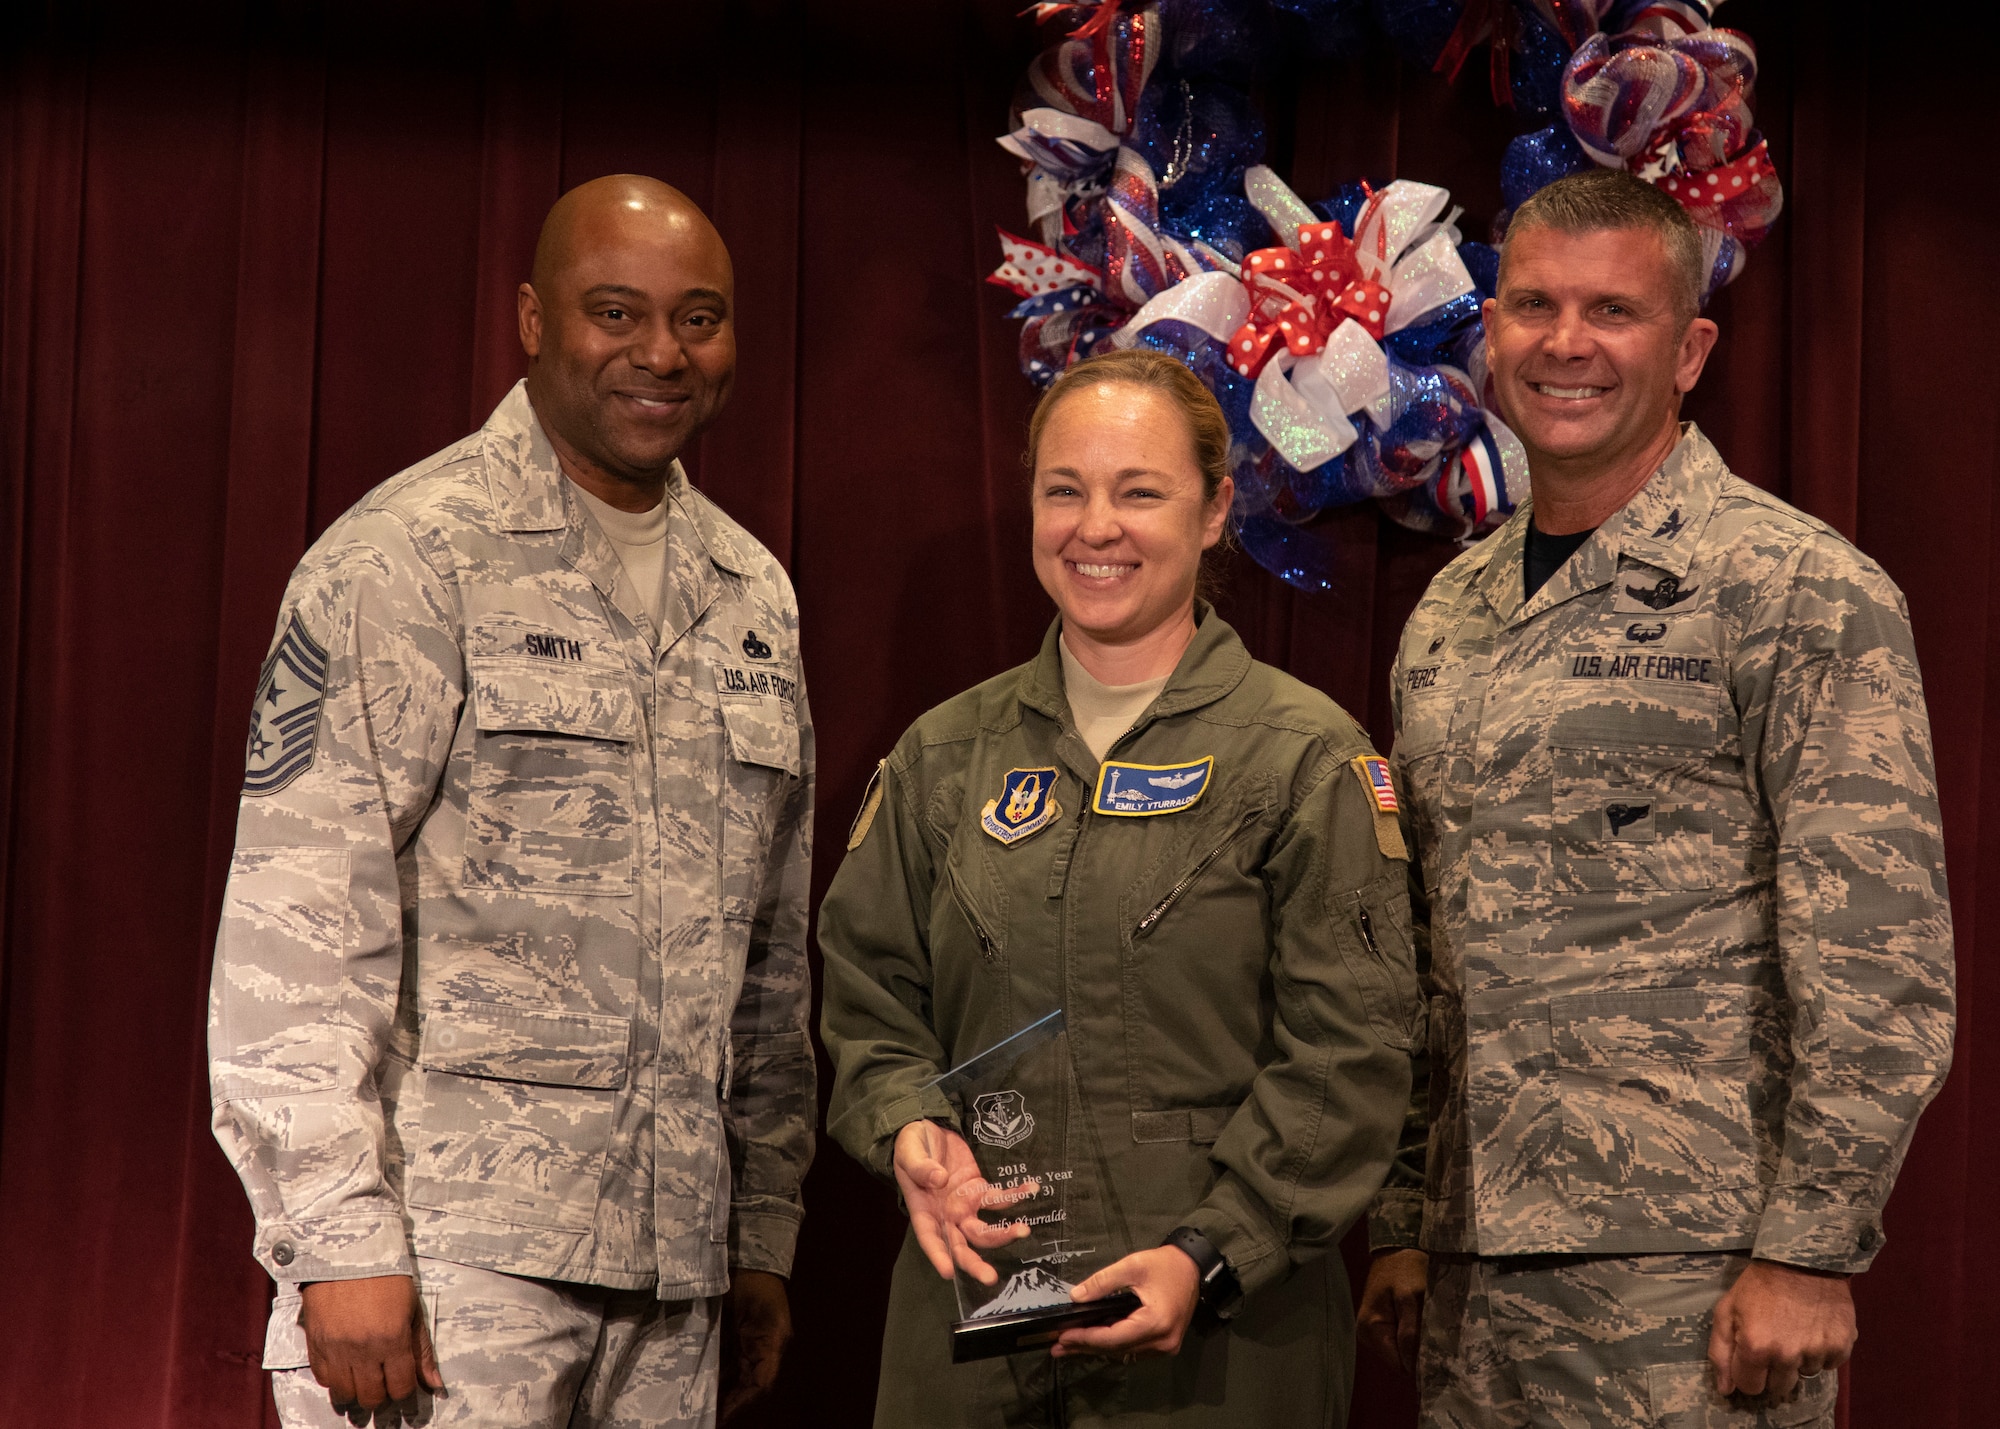 Major Emily Yturralde, 446th Airlift Wing, wins the award for Civilian of the Year (category 3).